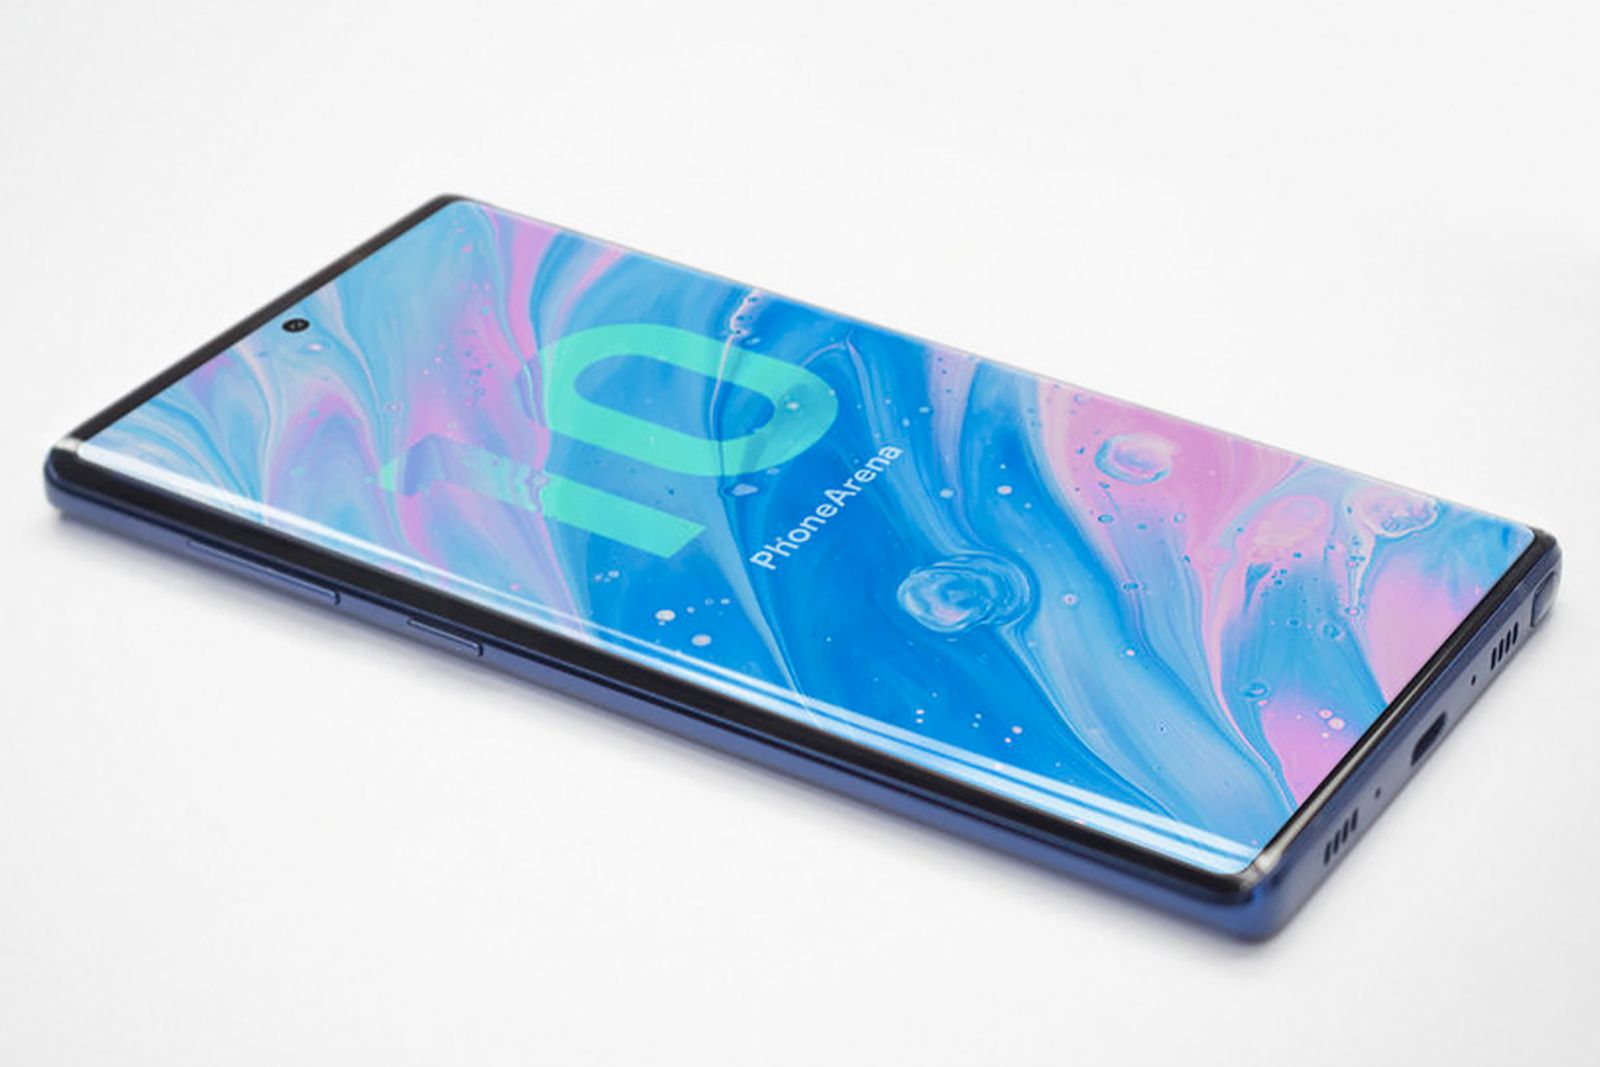 Samsung Galaxy Note 10 5g Benchmark Suggests Qualcomm Sd855 And 12gb Ram image 1